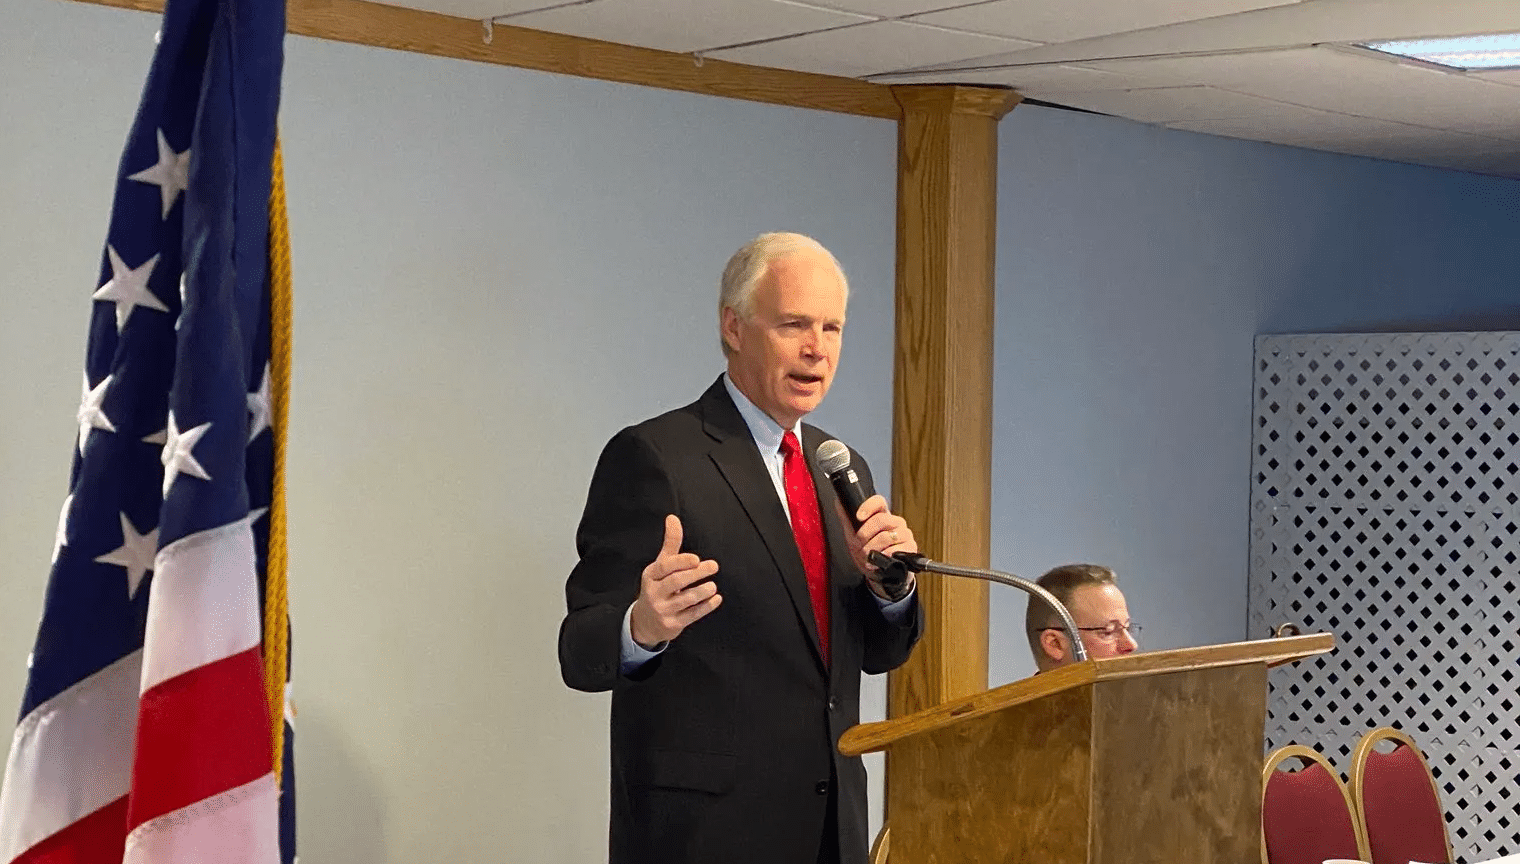 Sen. Ron Johnson’s YouTube account suspended for sketchy COVID information